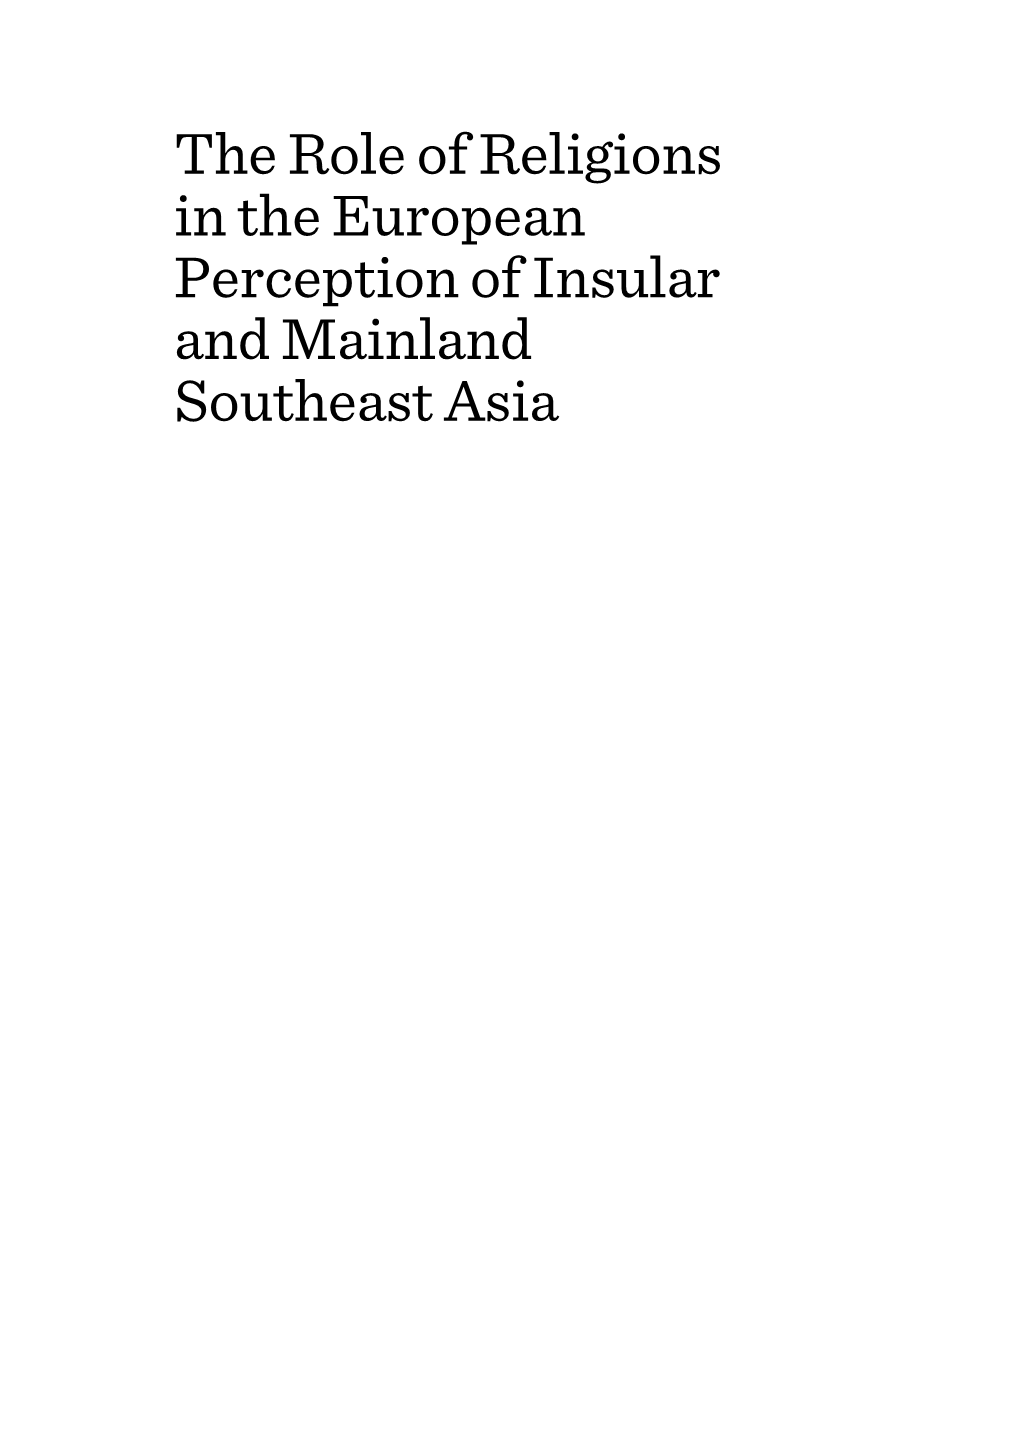 The Role of Religions in the European Perception of Insular and Mainland Southeast Asia